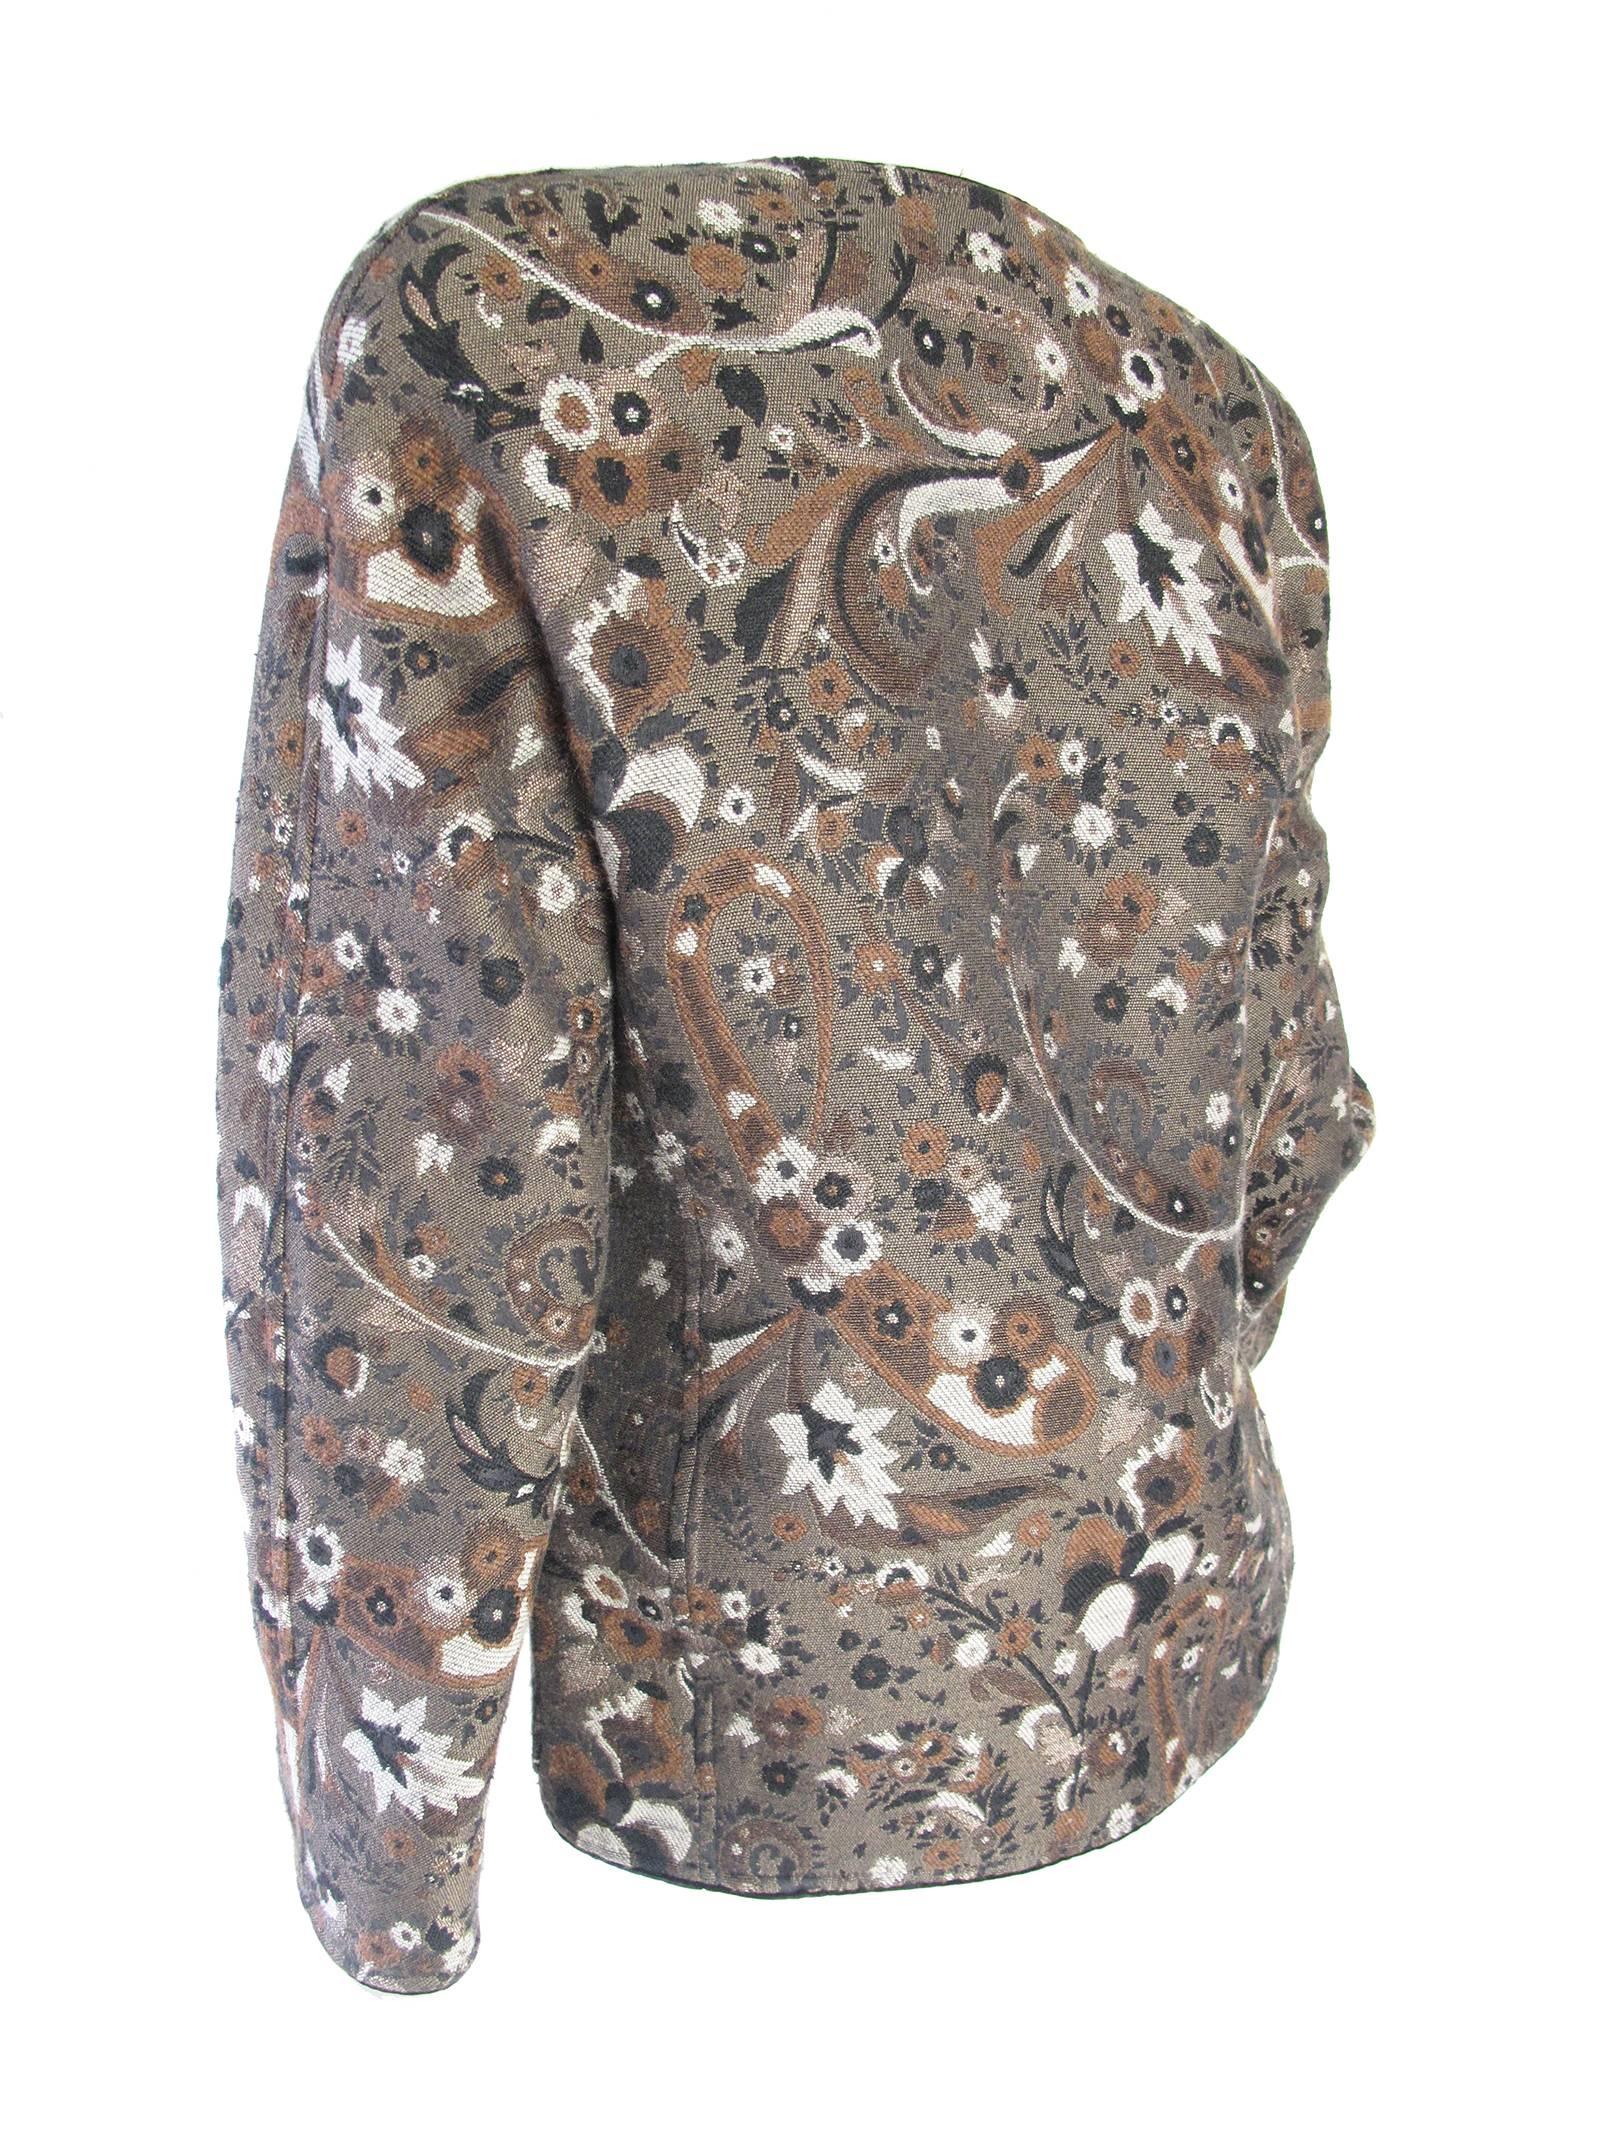 Valentino floral print jacket. Two front pockets, two button closure on front.  V neck.  Condition: Excellent.  Size 8

We accept returns for refund, please see our terms. We offer free ground shipping within the US. 